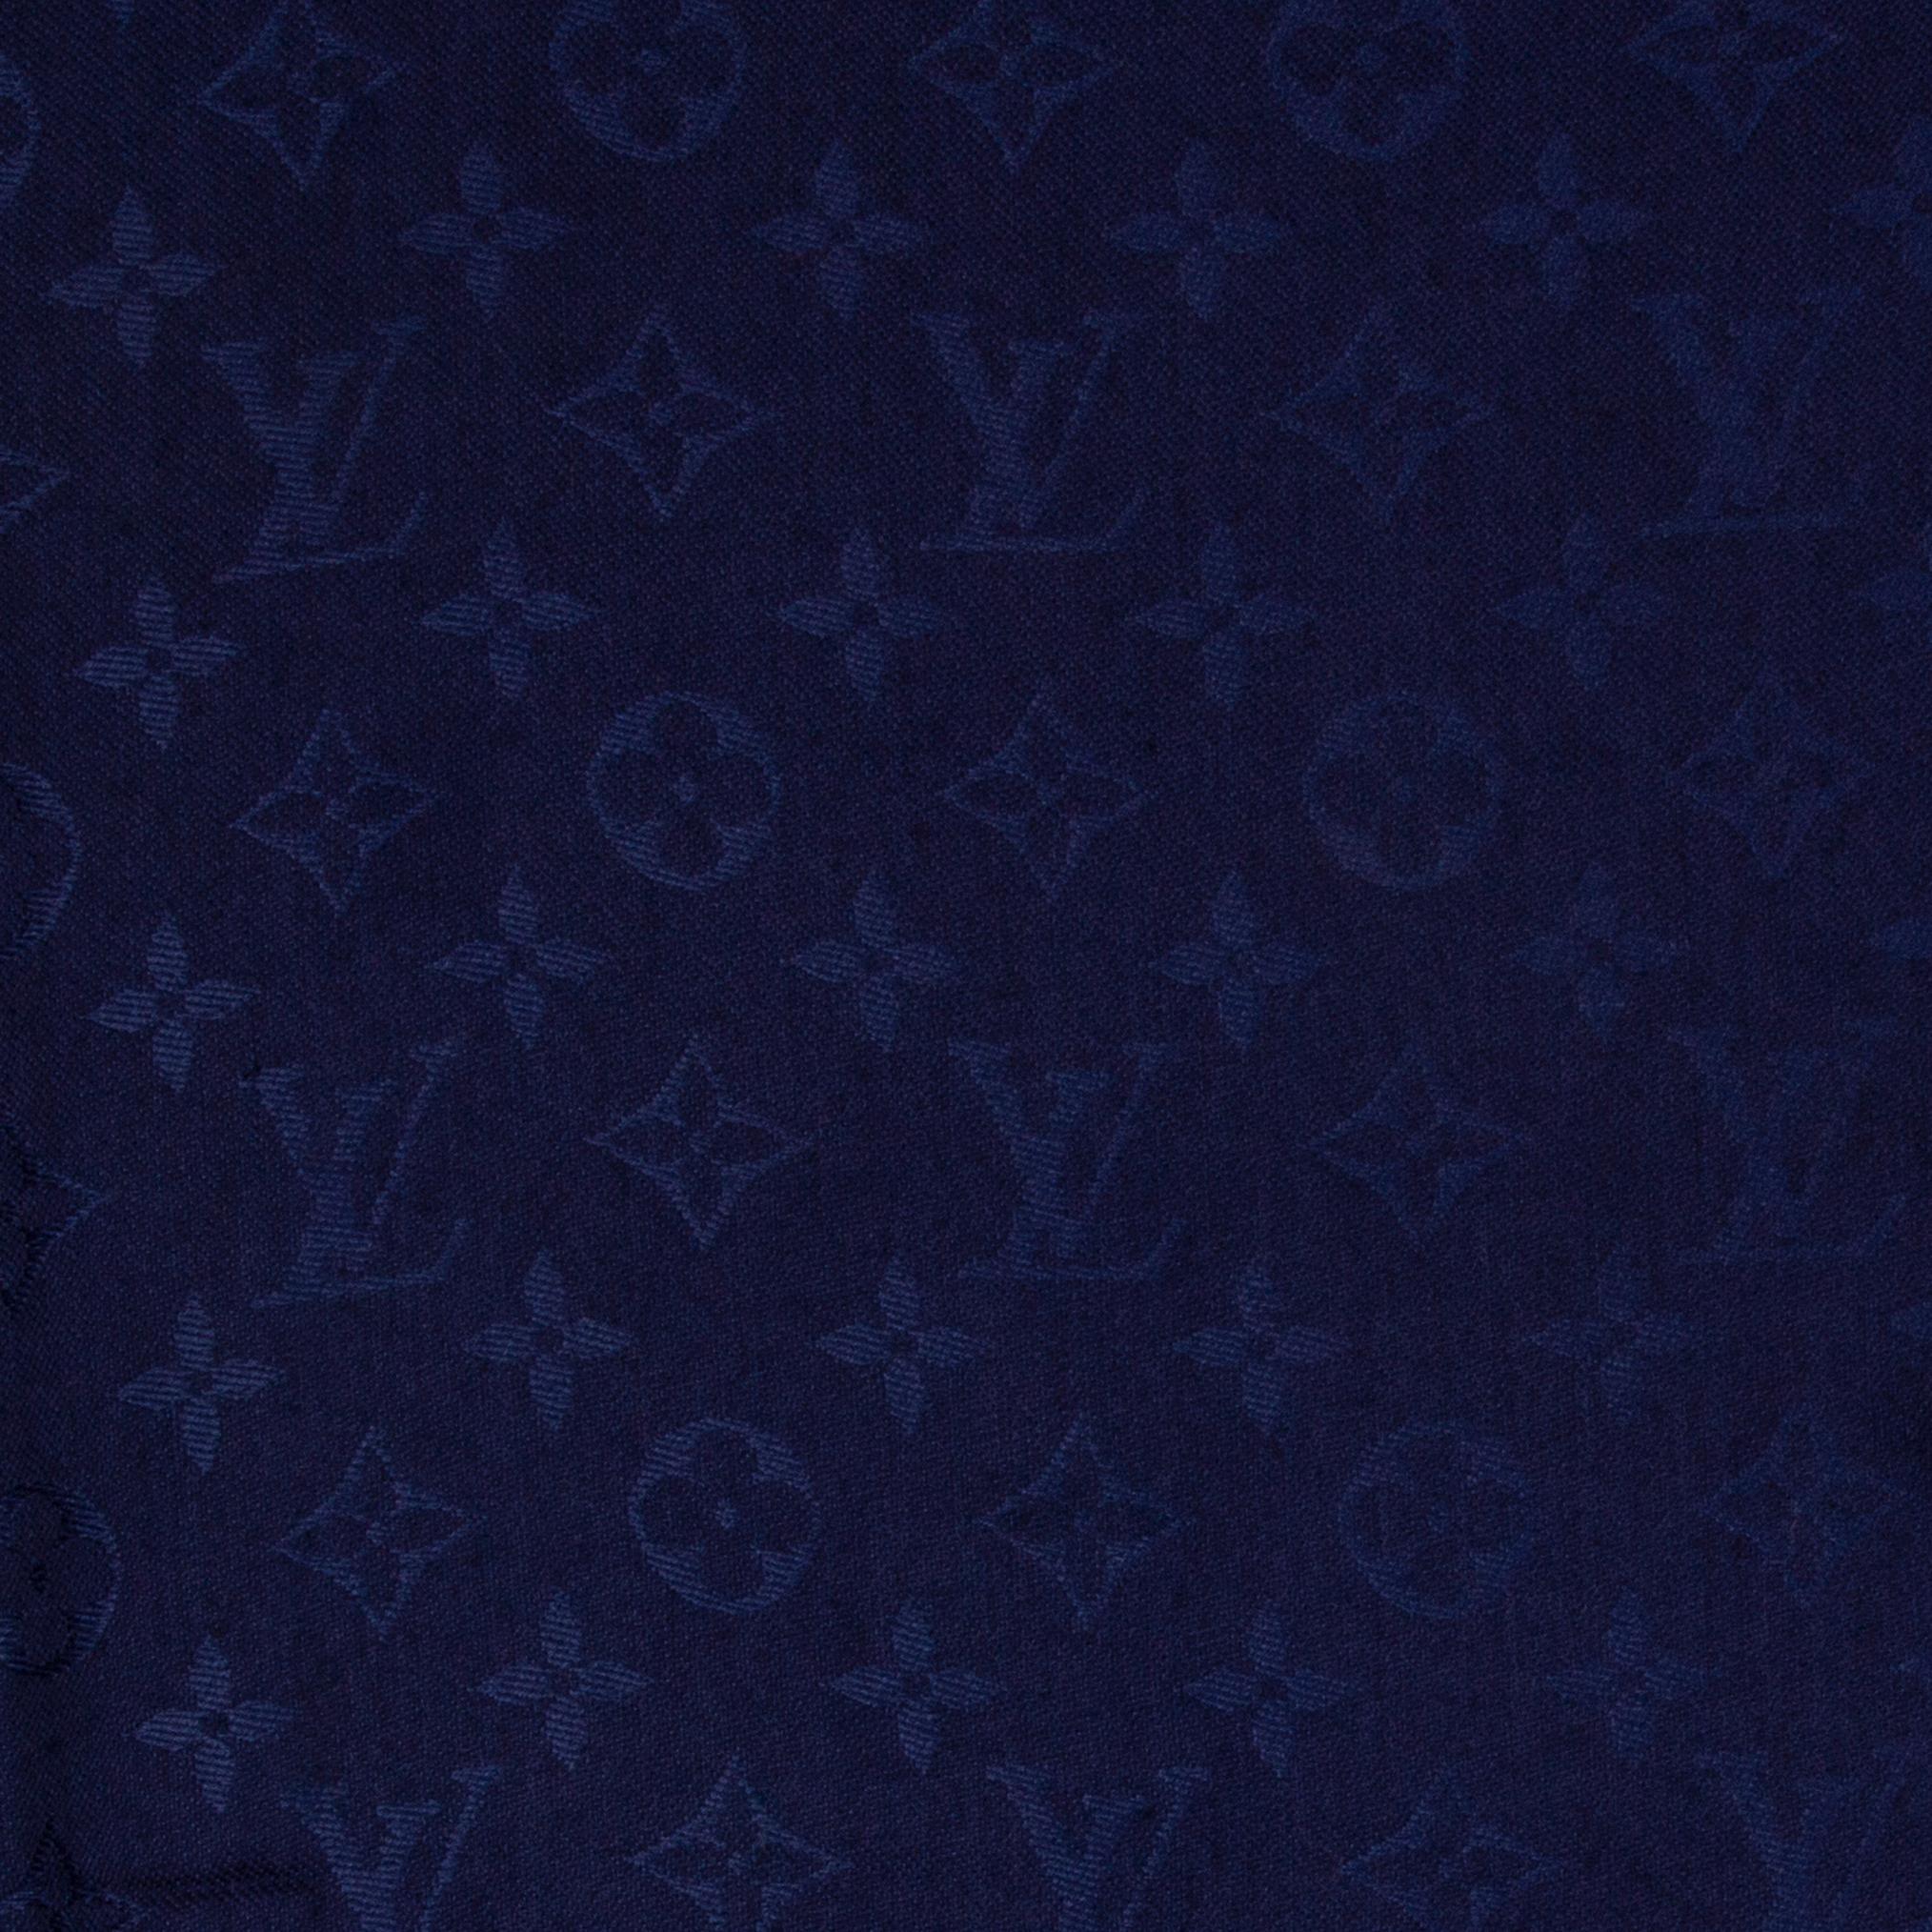 Louis Vuitton fringed monogram shawl in dark blue silk (60%) and wool (40%) with monogram jacquard. There are some hardly noticable small pulled threads in the fabric, otherwise it is in great condition. 

Width 140cm (54.6in)
Length 140cm (54.6in)
